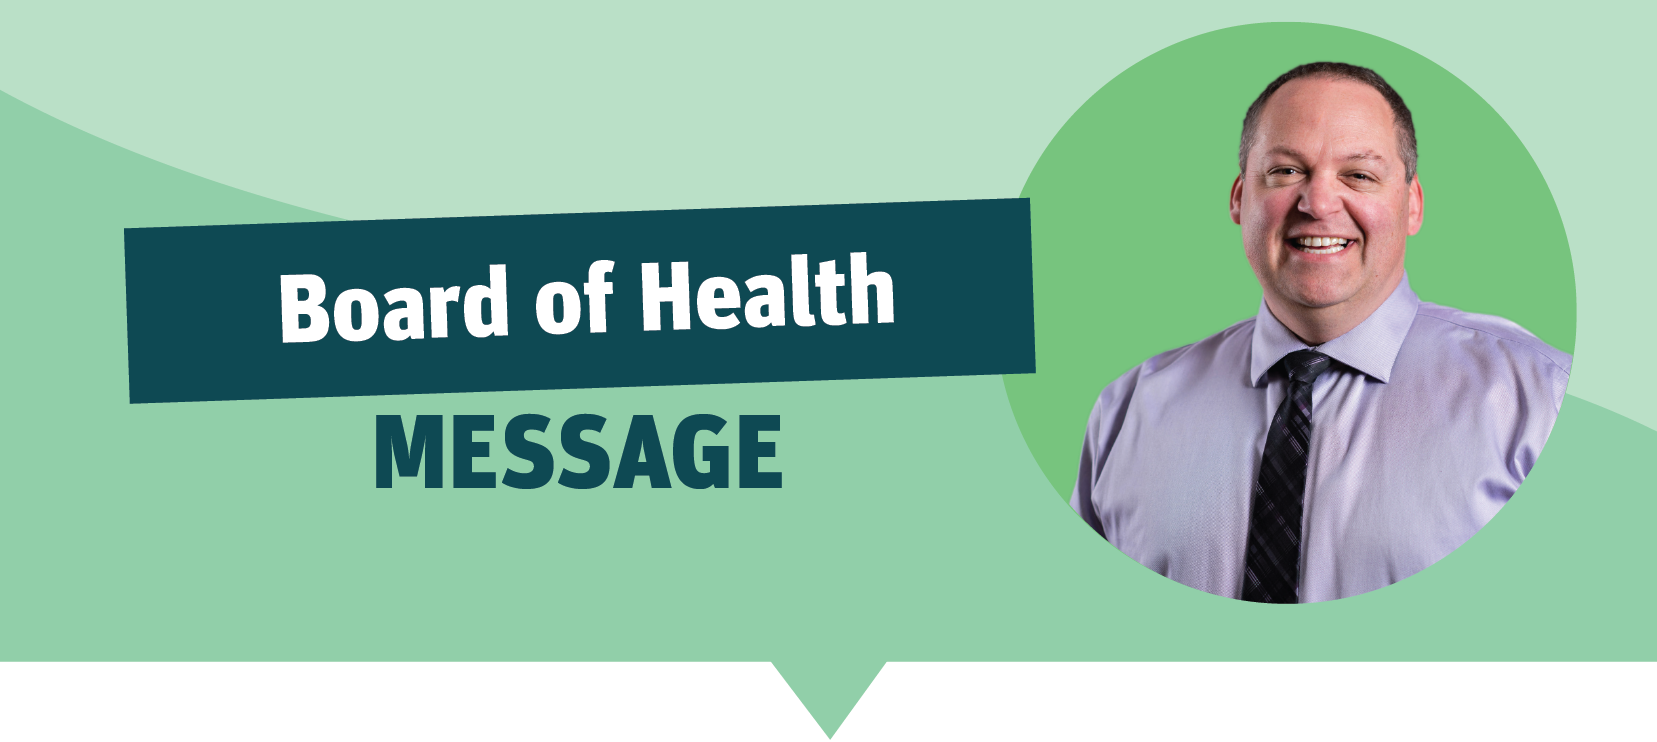 Board of Health message